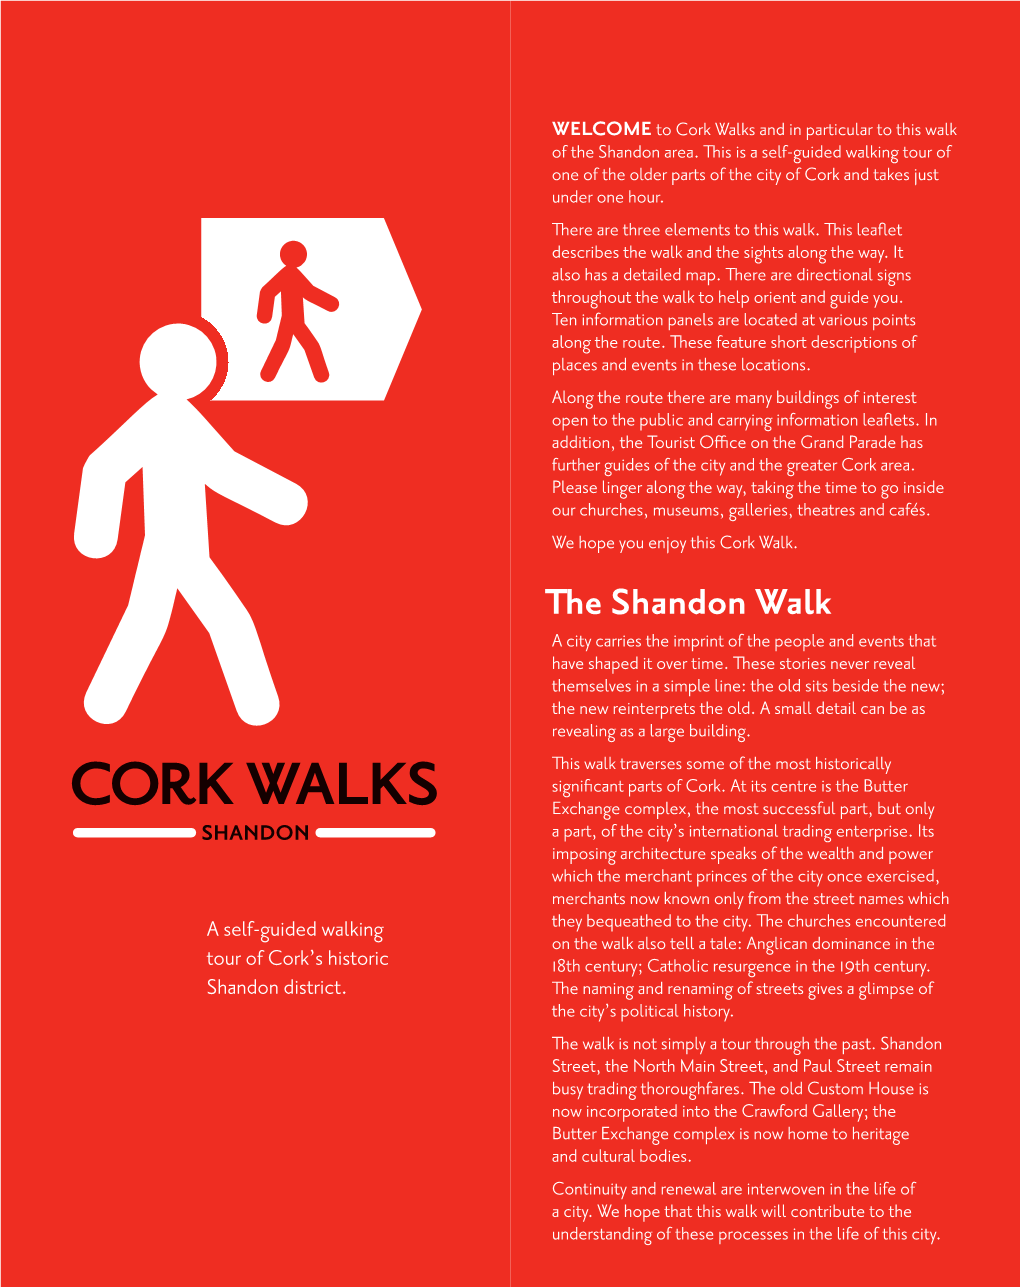 The Shandon Walk a City Carries the Imprint of the People and Events That Have Shaped It Over Time